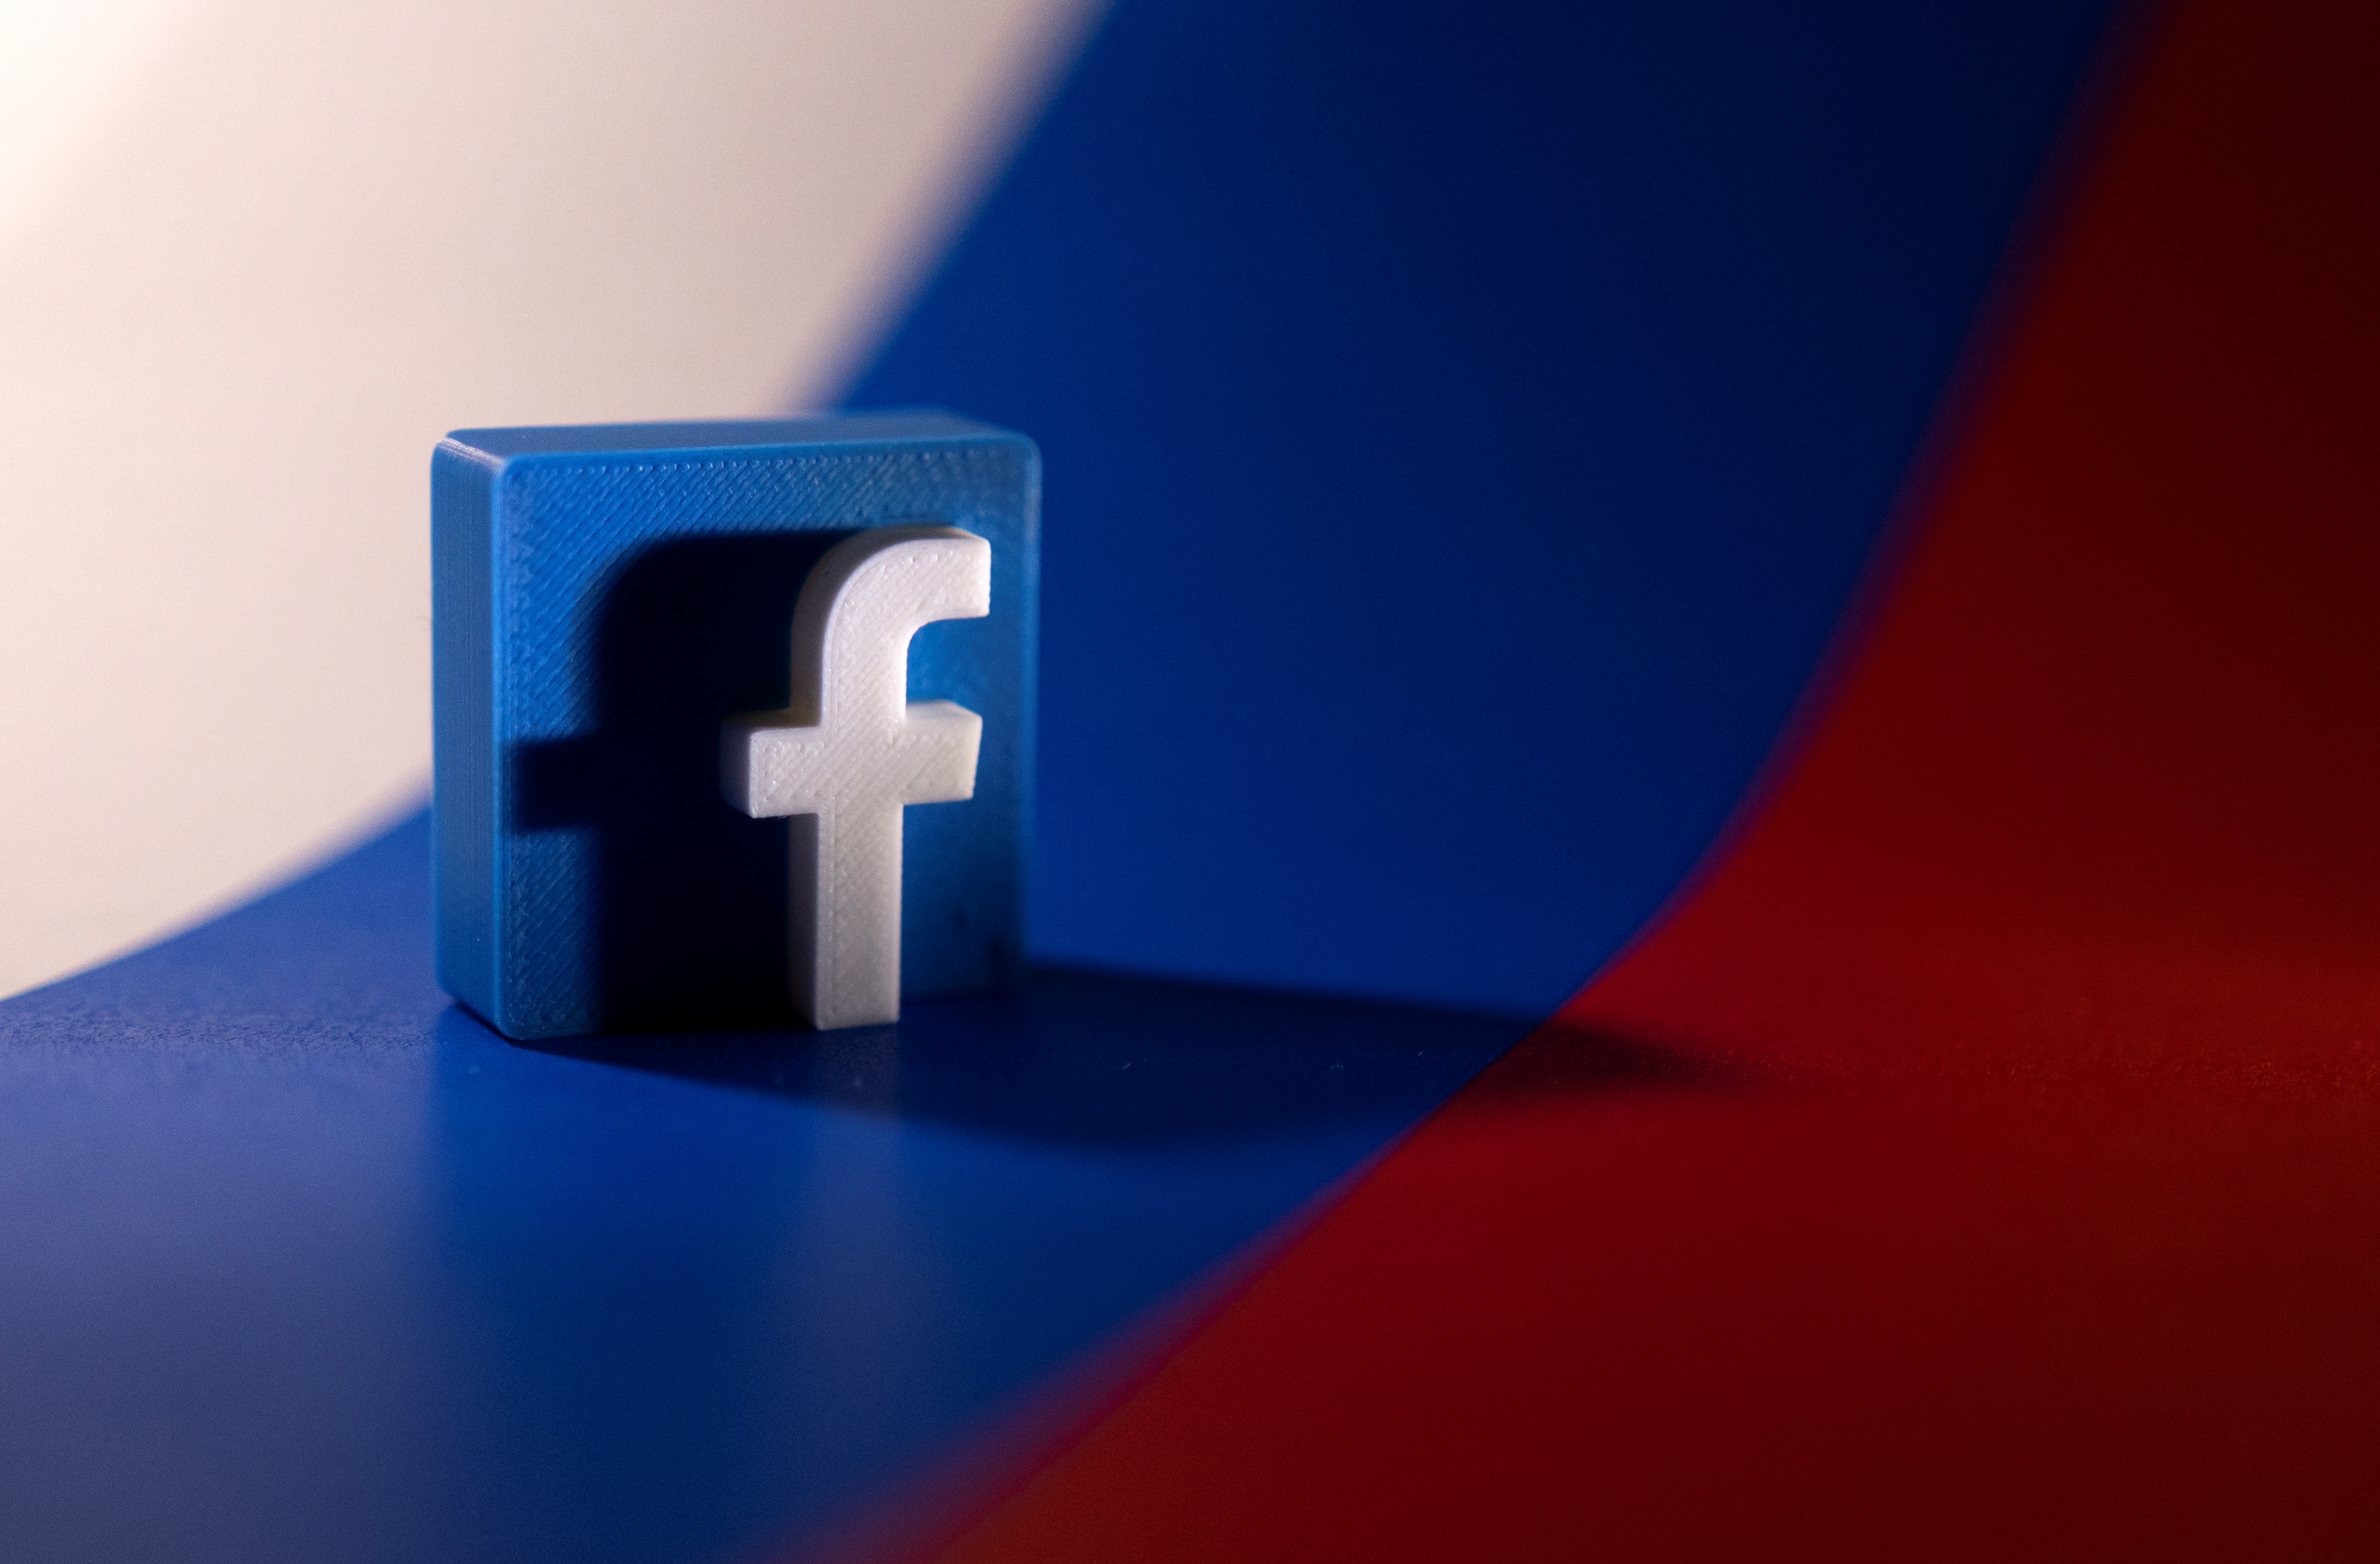 Illustration shows Facebook logo and Russian flag